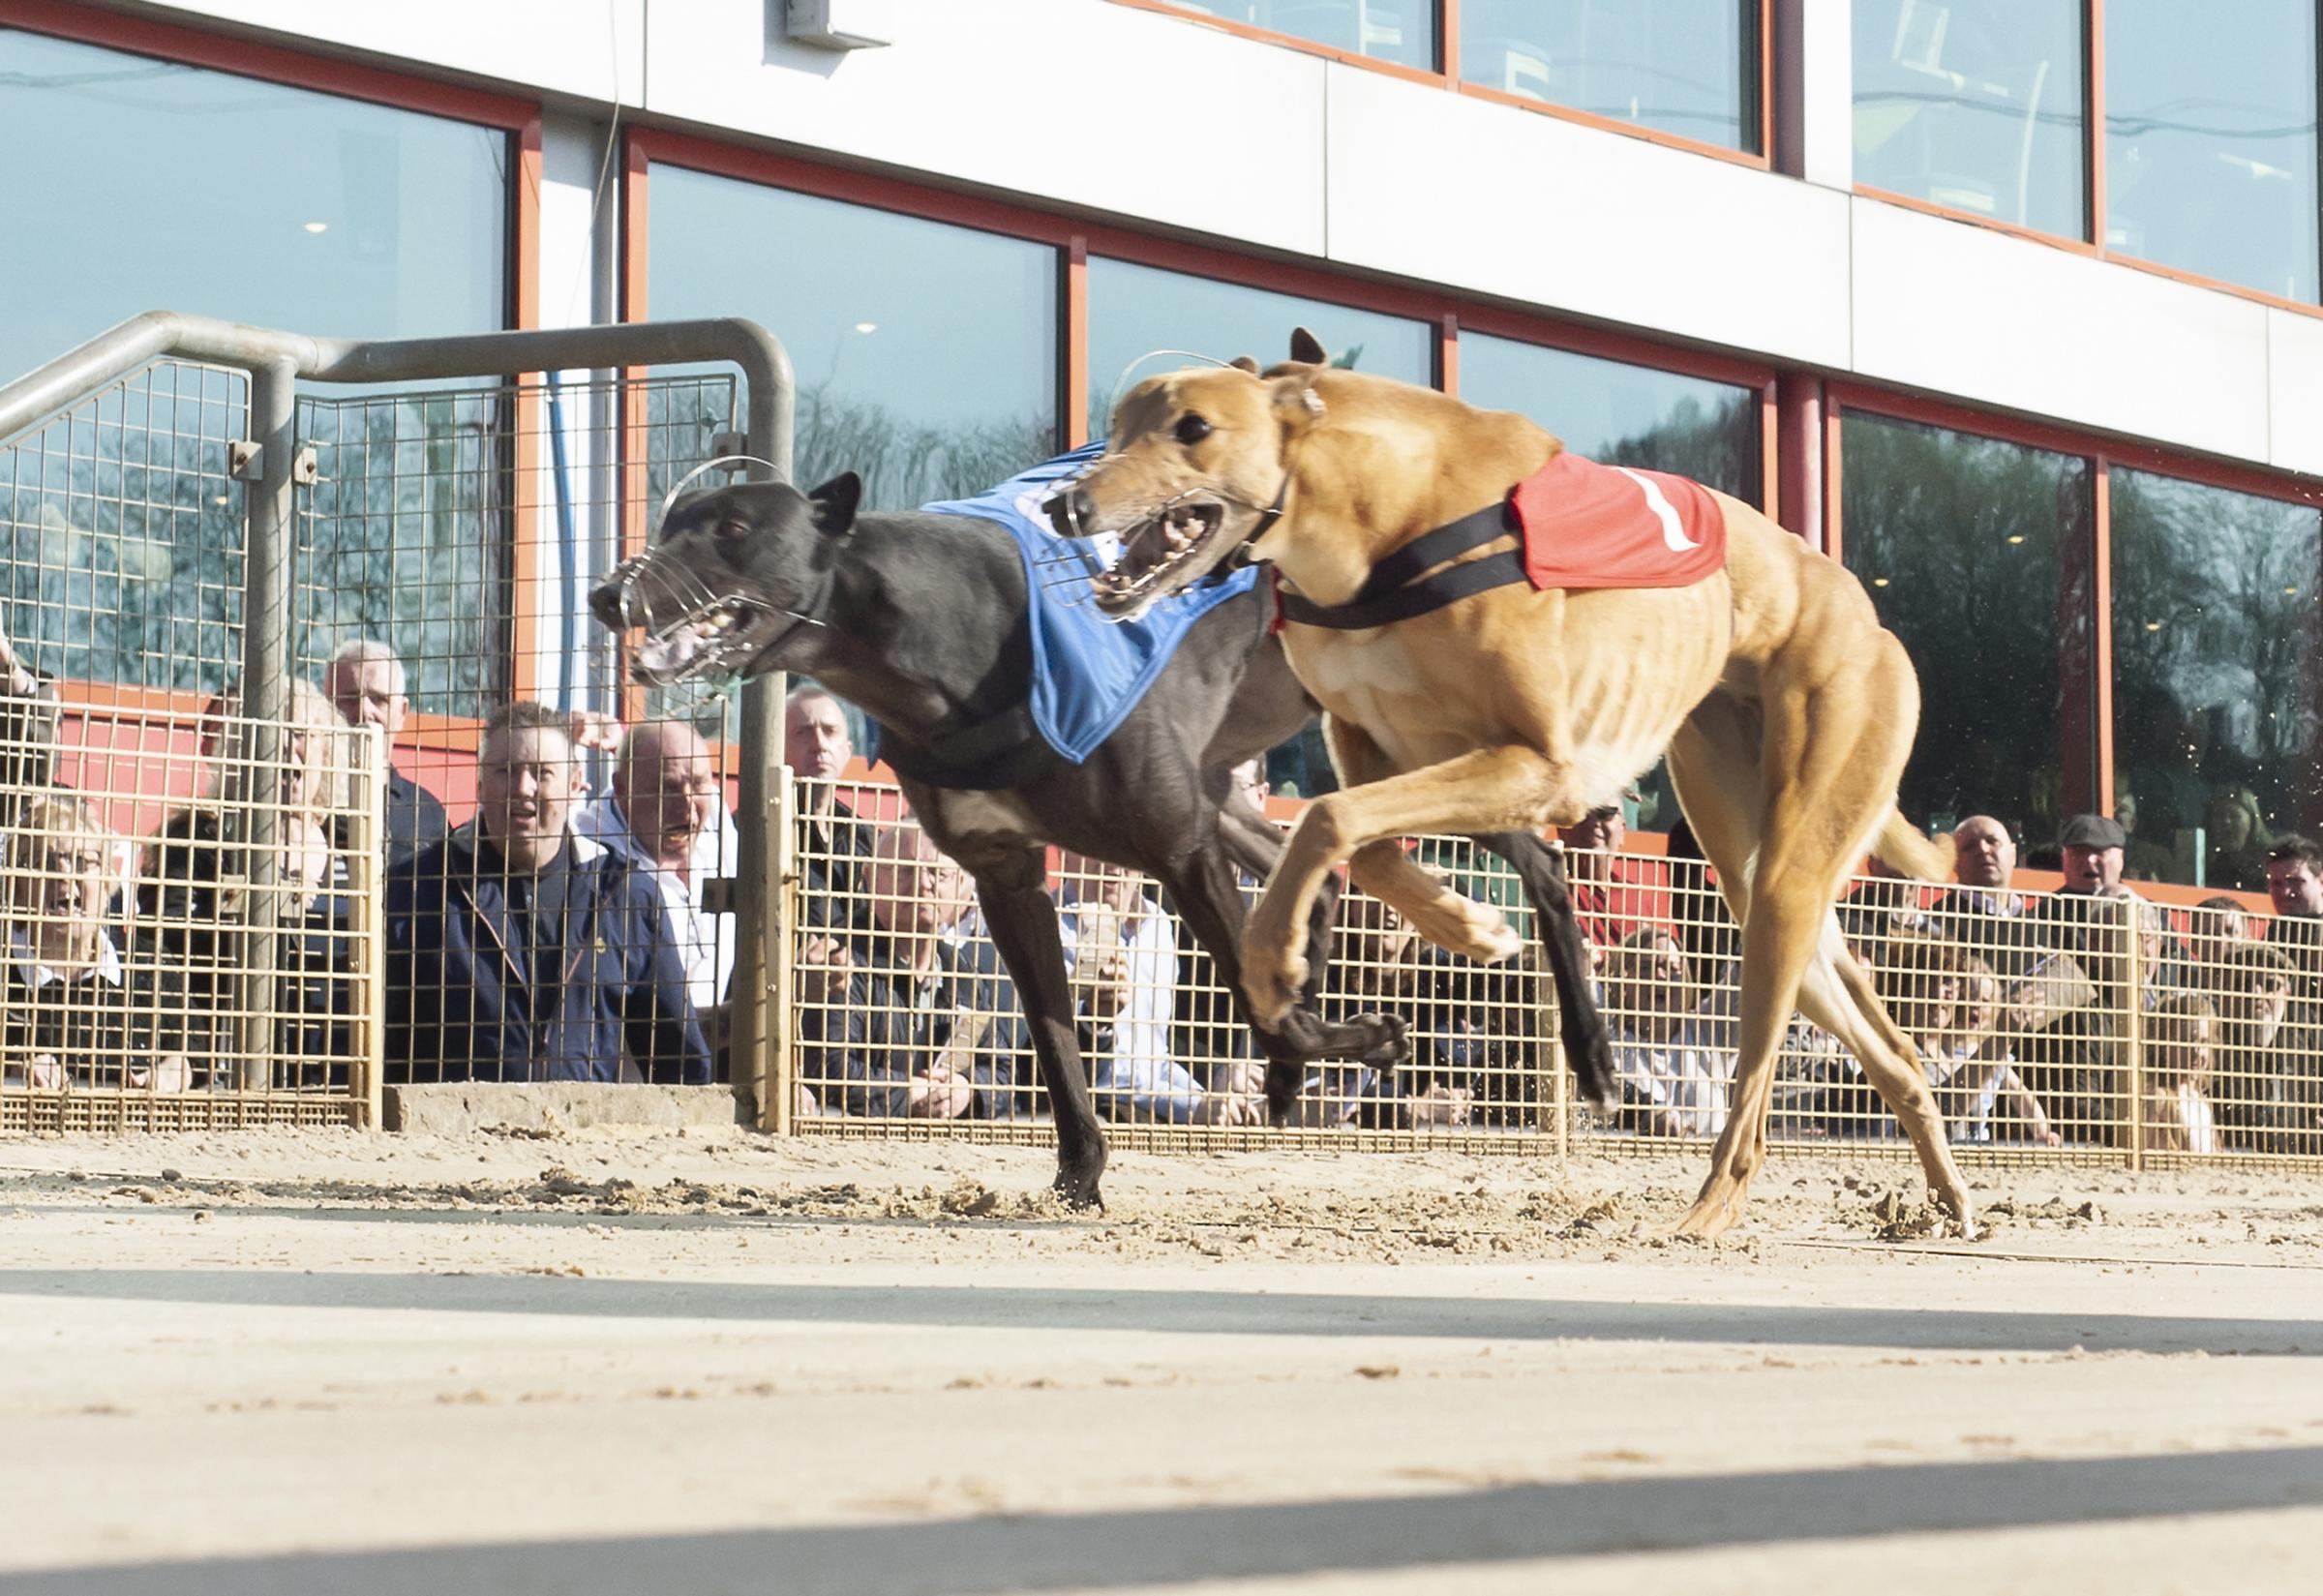 STARDOM (t1) gets up to beat Towcester Story (t2) by a head in the Ladbrokes Golden Jacket Final. Crayford. Photo: © Steve Nash